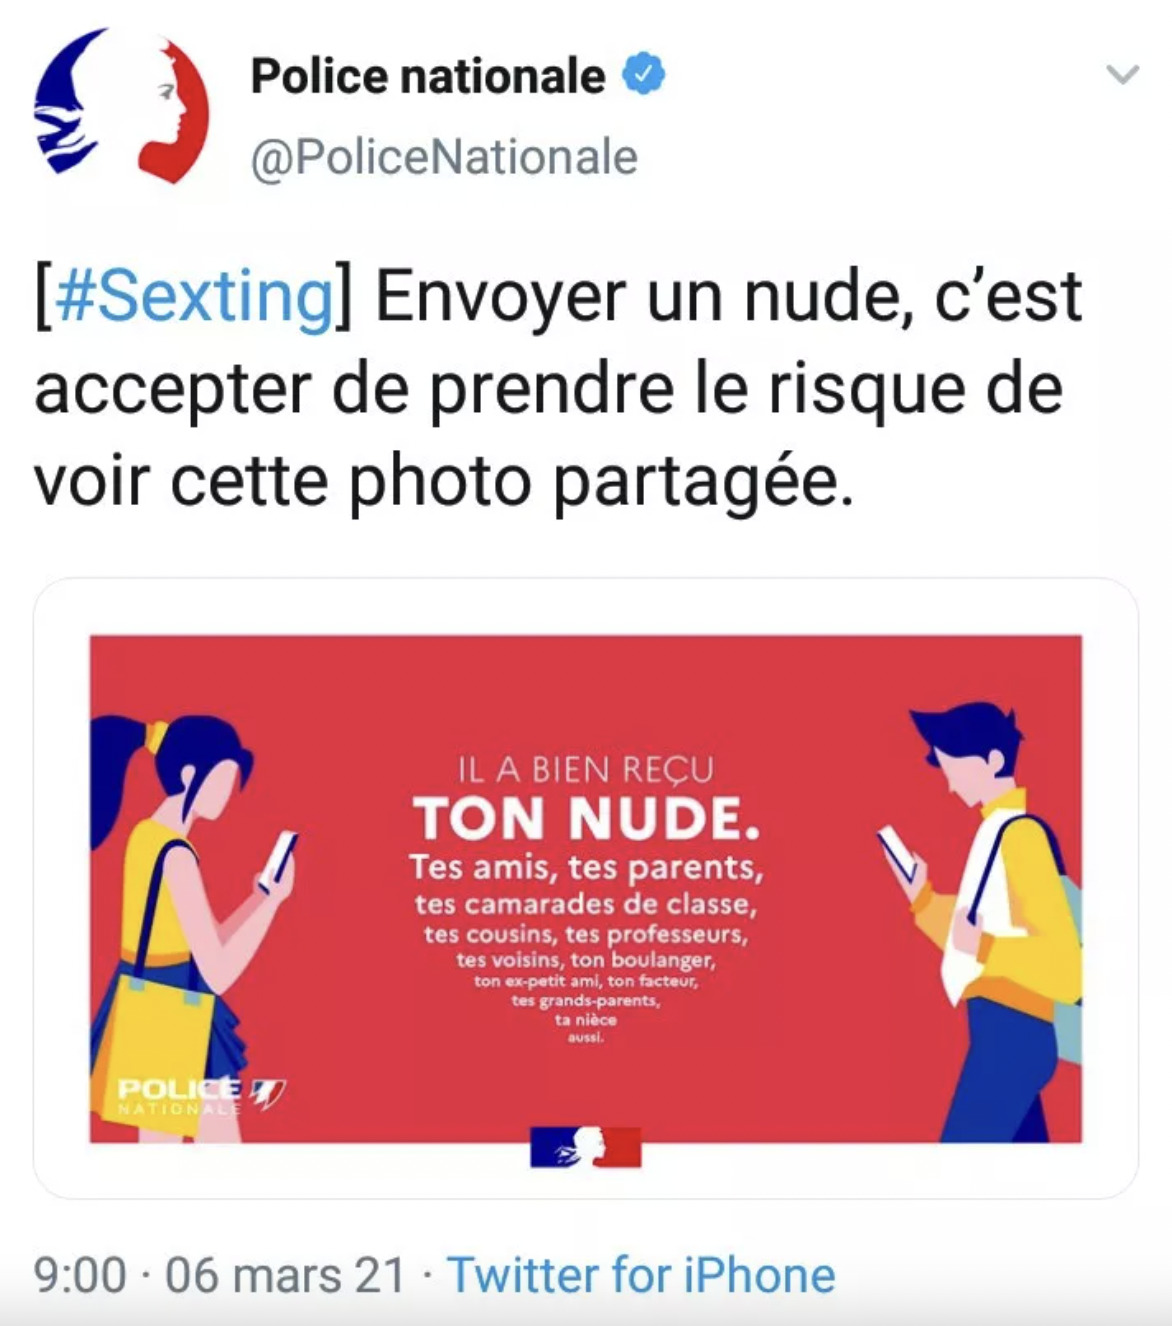 nude-police-nationale